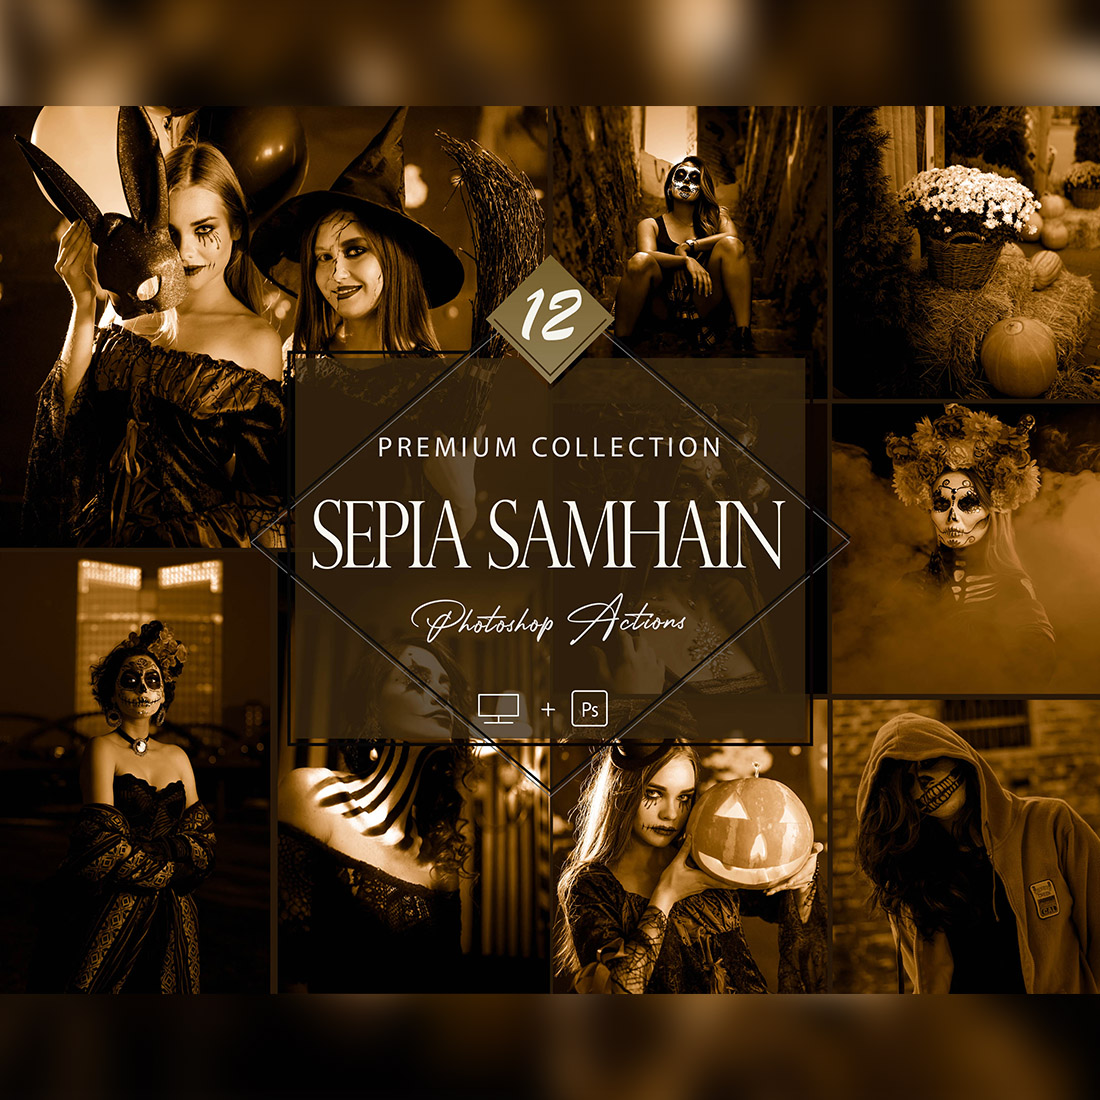 12 Sepia Samhain Photoshop Actions, Moody ACR Presets, Sepia Ps Action, Fall Desktop LR Filter, DNG Portrait Lifestyle, Top Theme, Blogger Instagram cover image.